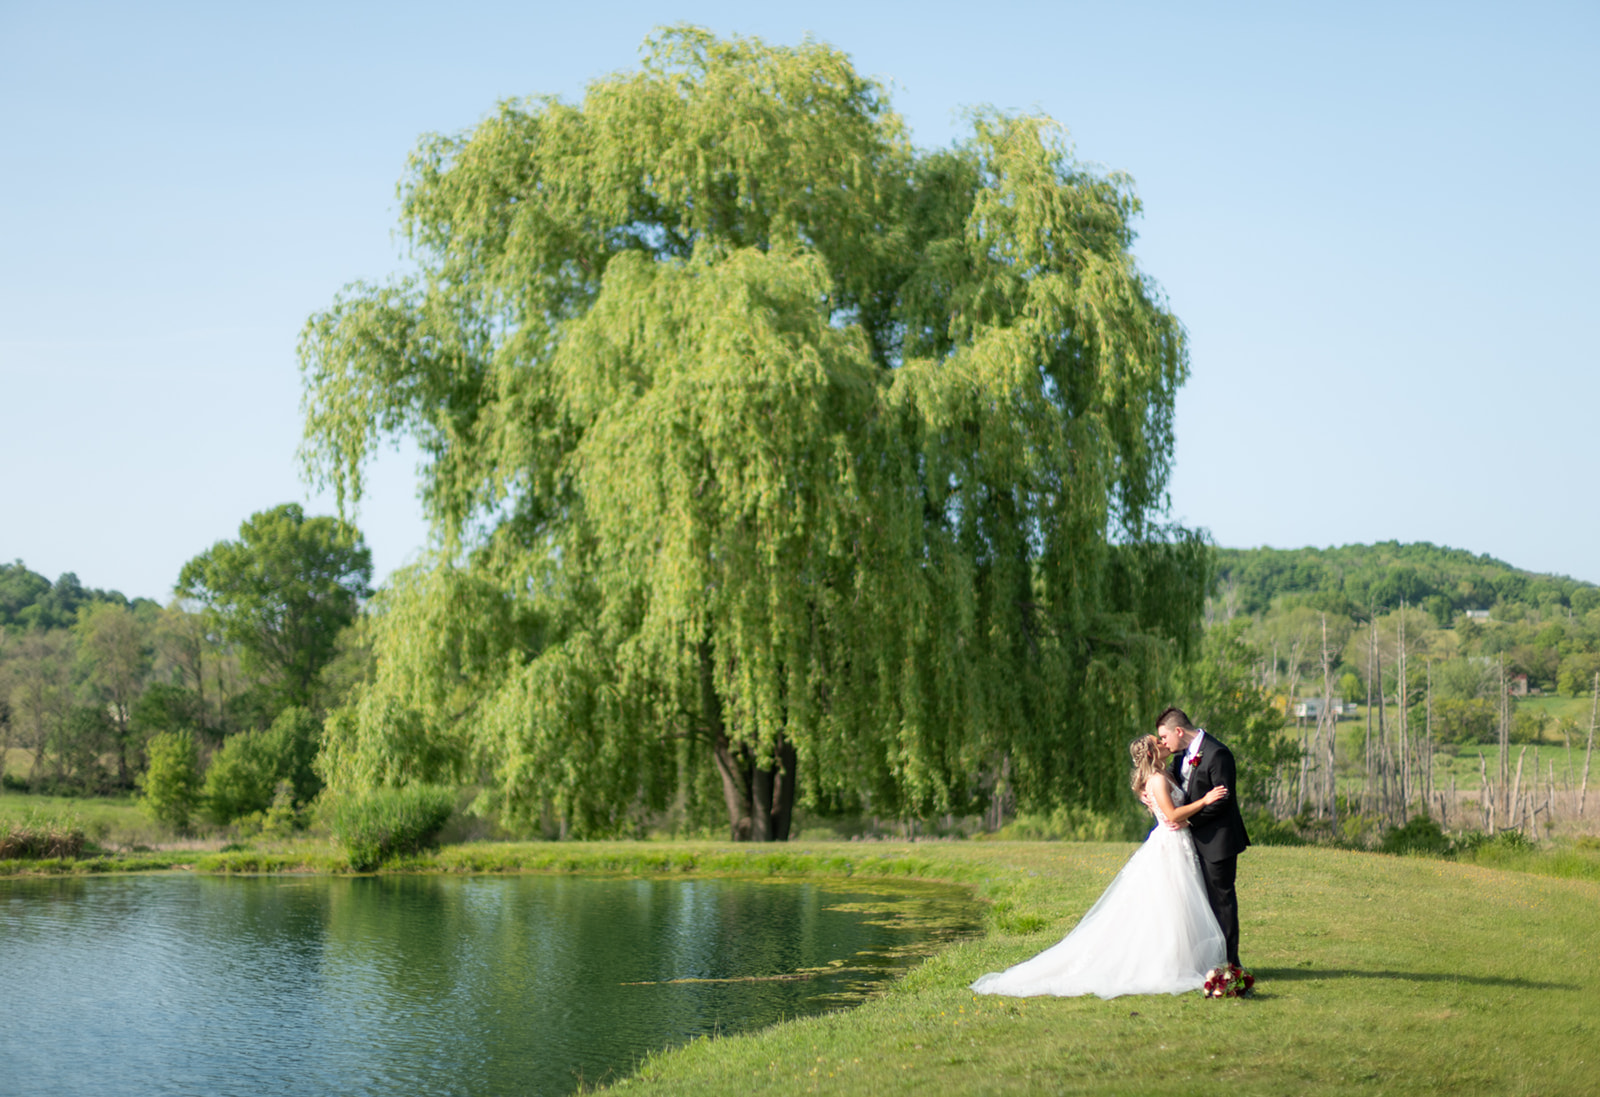 Bride and groom sharing a romantic kiss by a scenic lake in the Poconos, capturing a tender moment 